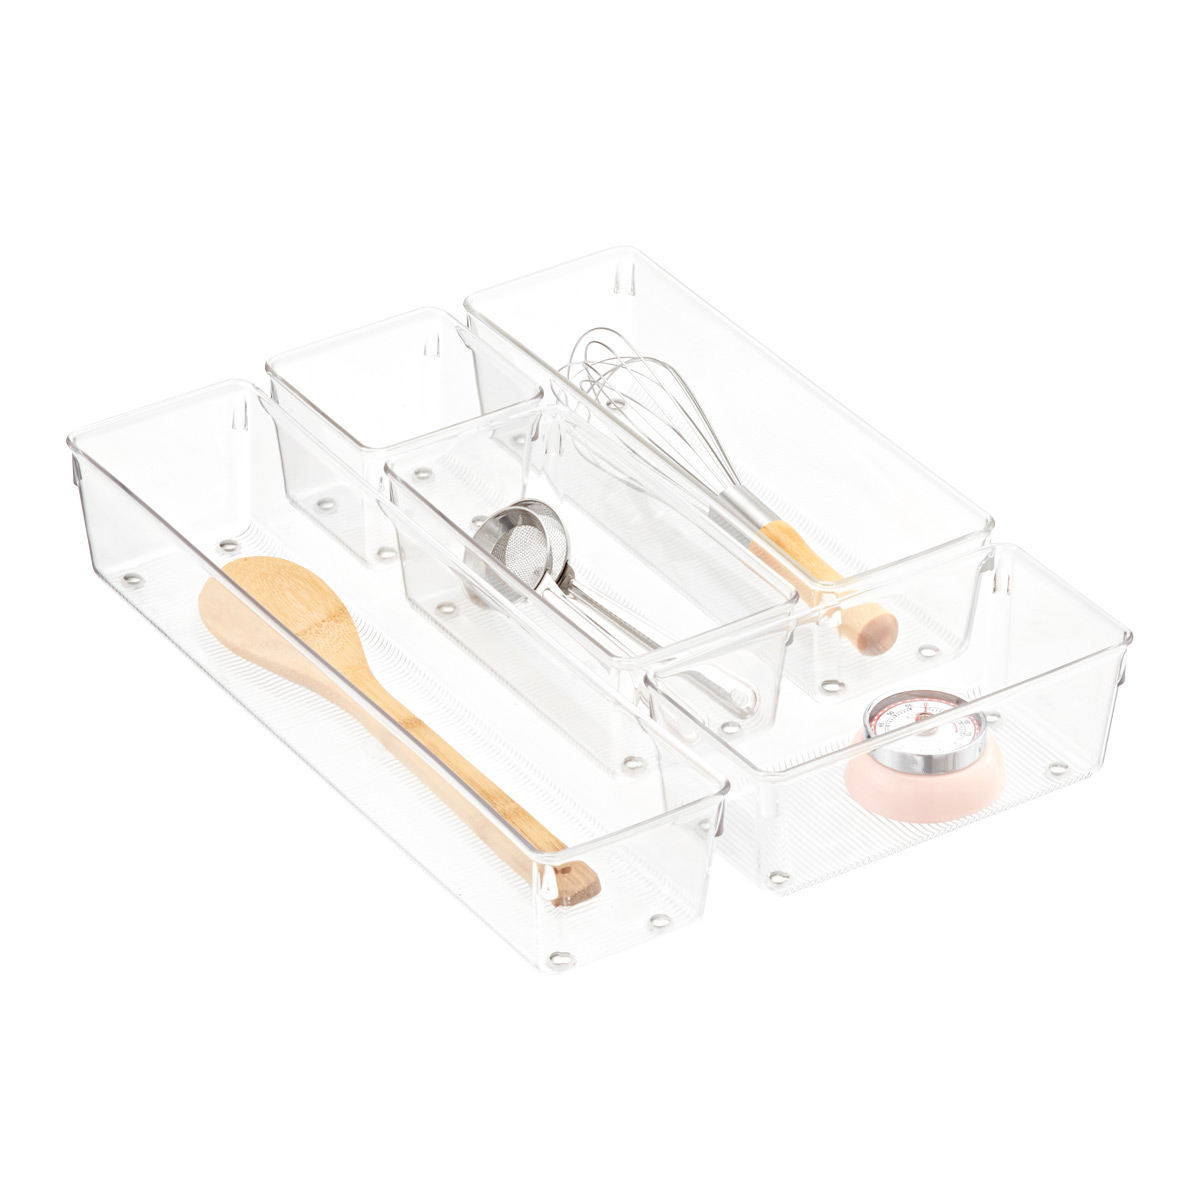 https://www.containerstore.com/catalogimages/313993/10029071g-linus-deep-drawer-organize.jpg